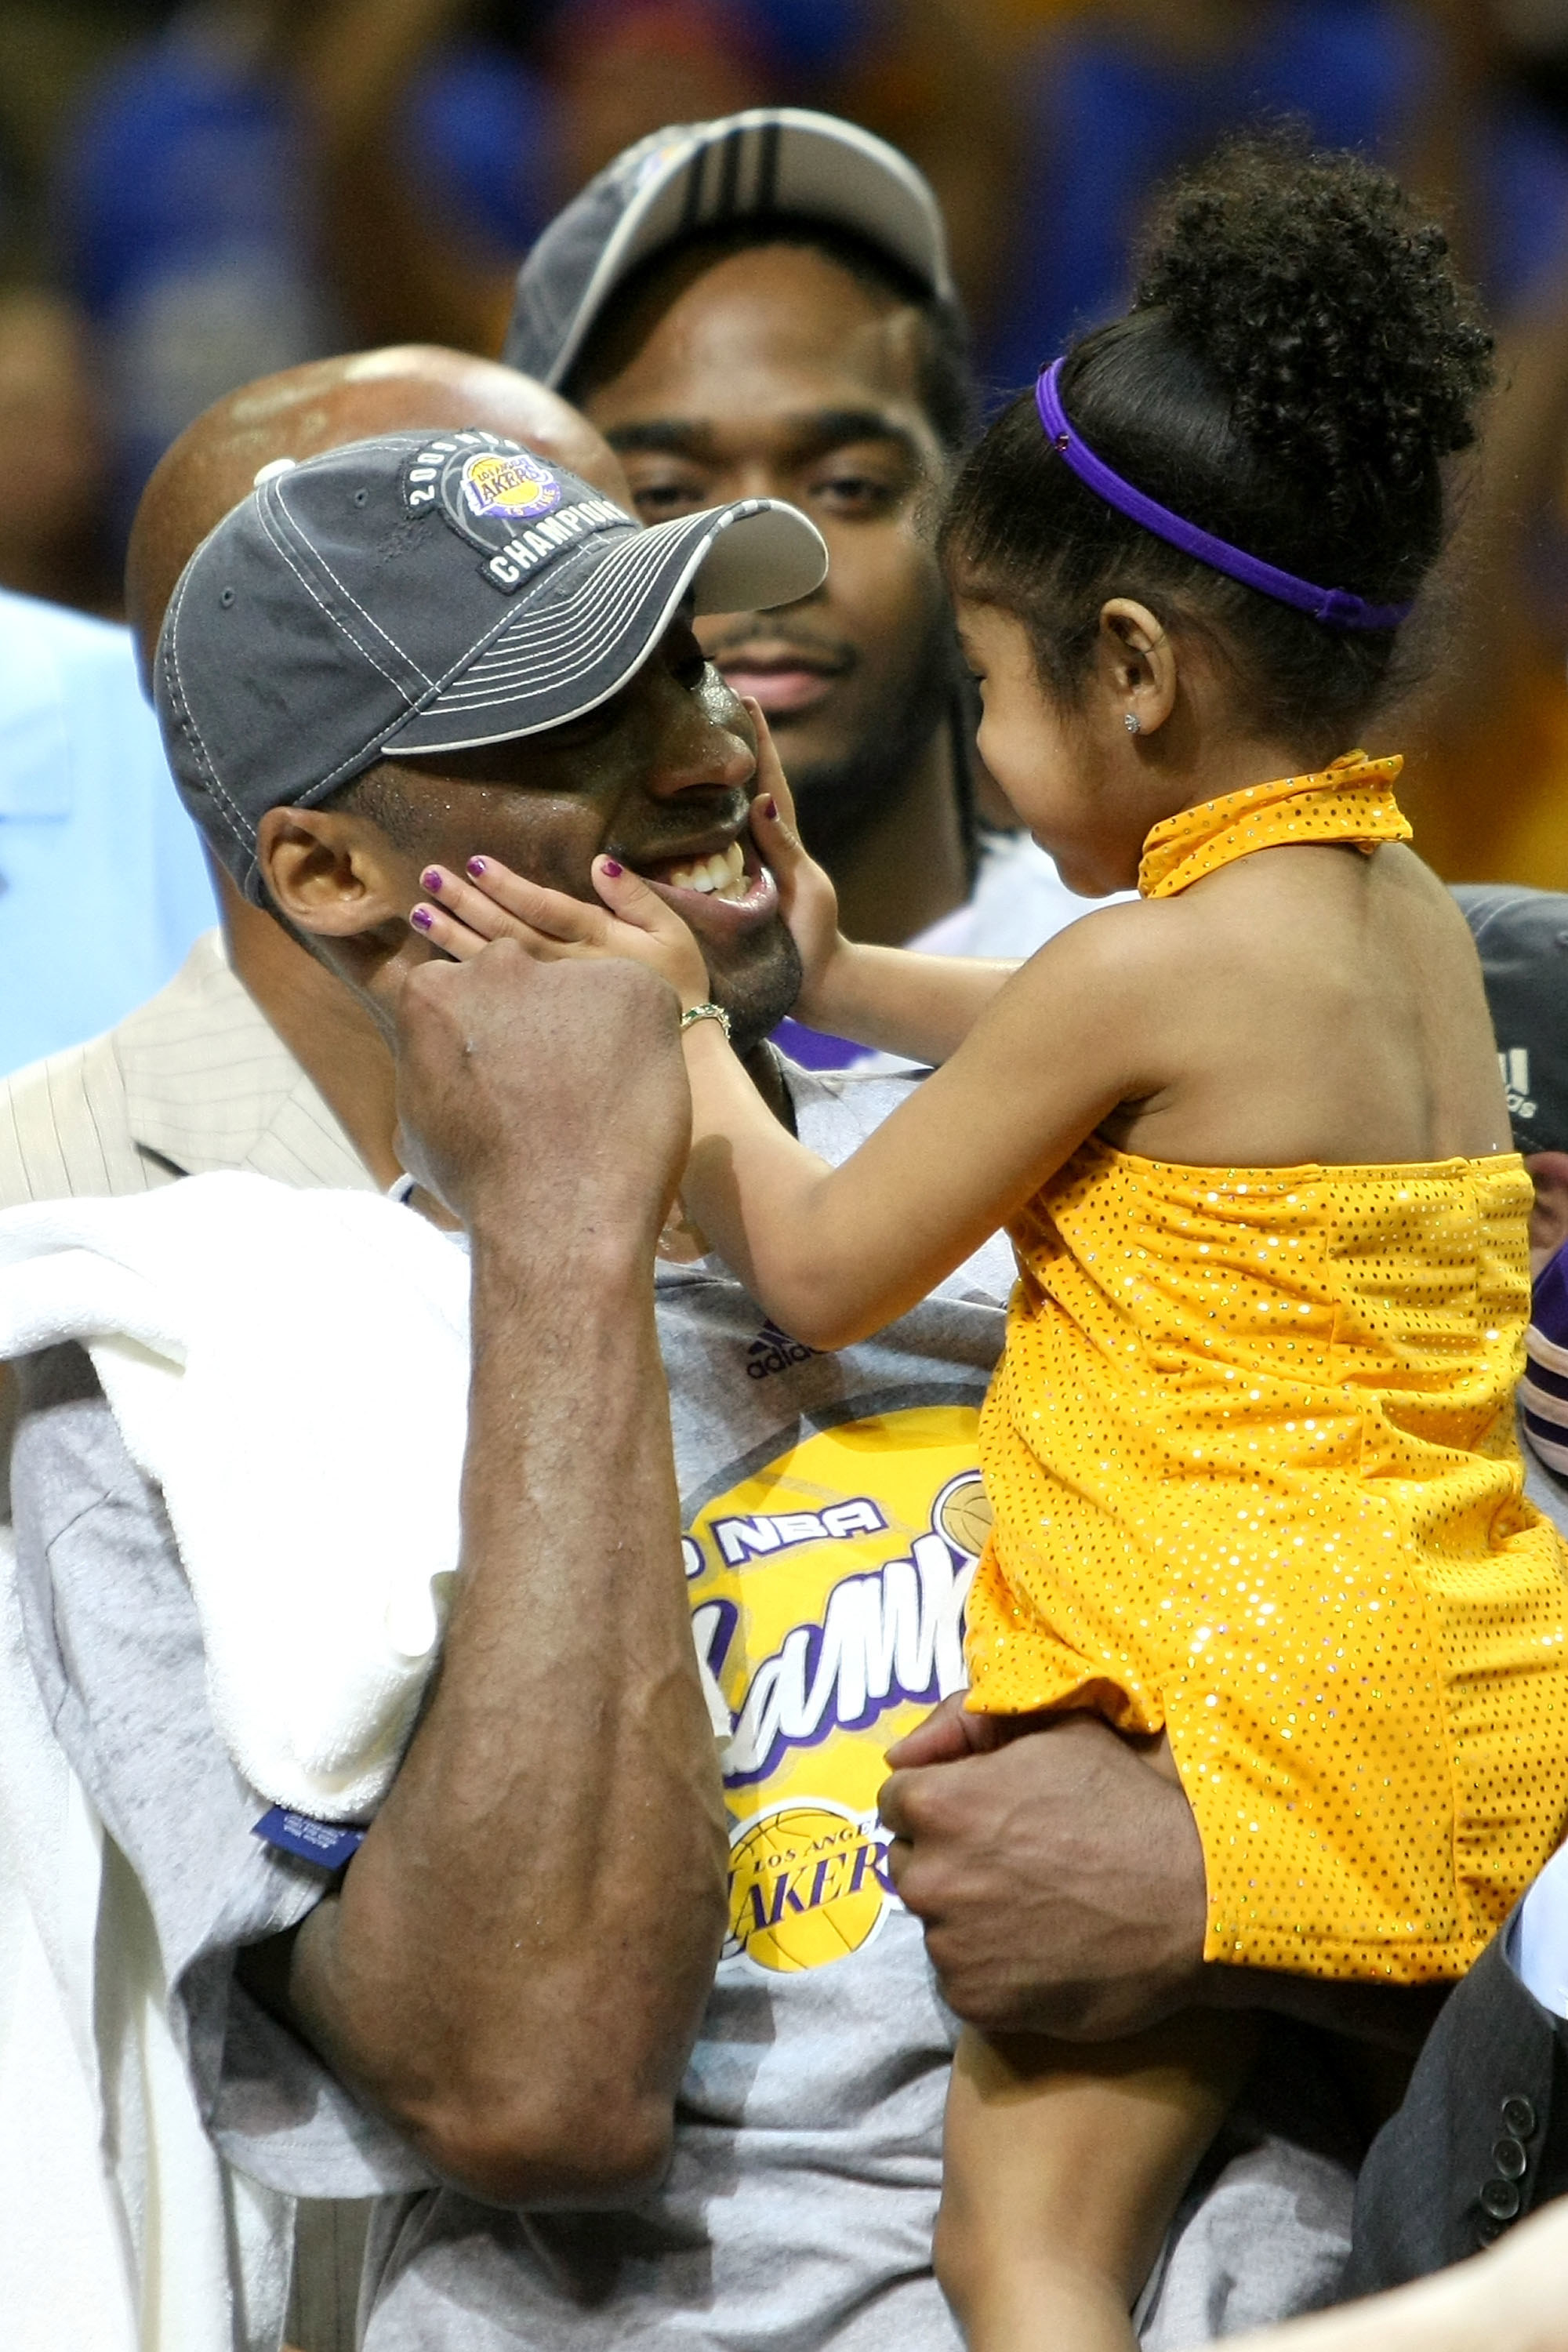 Kobe And Gianna 'Gigi' Bryant Pictures Over The Years